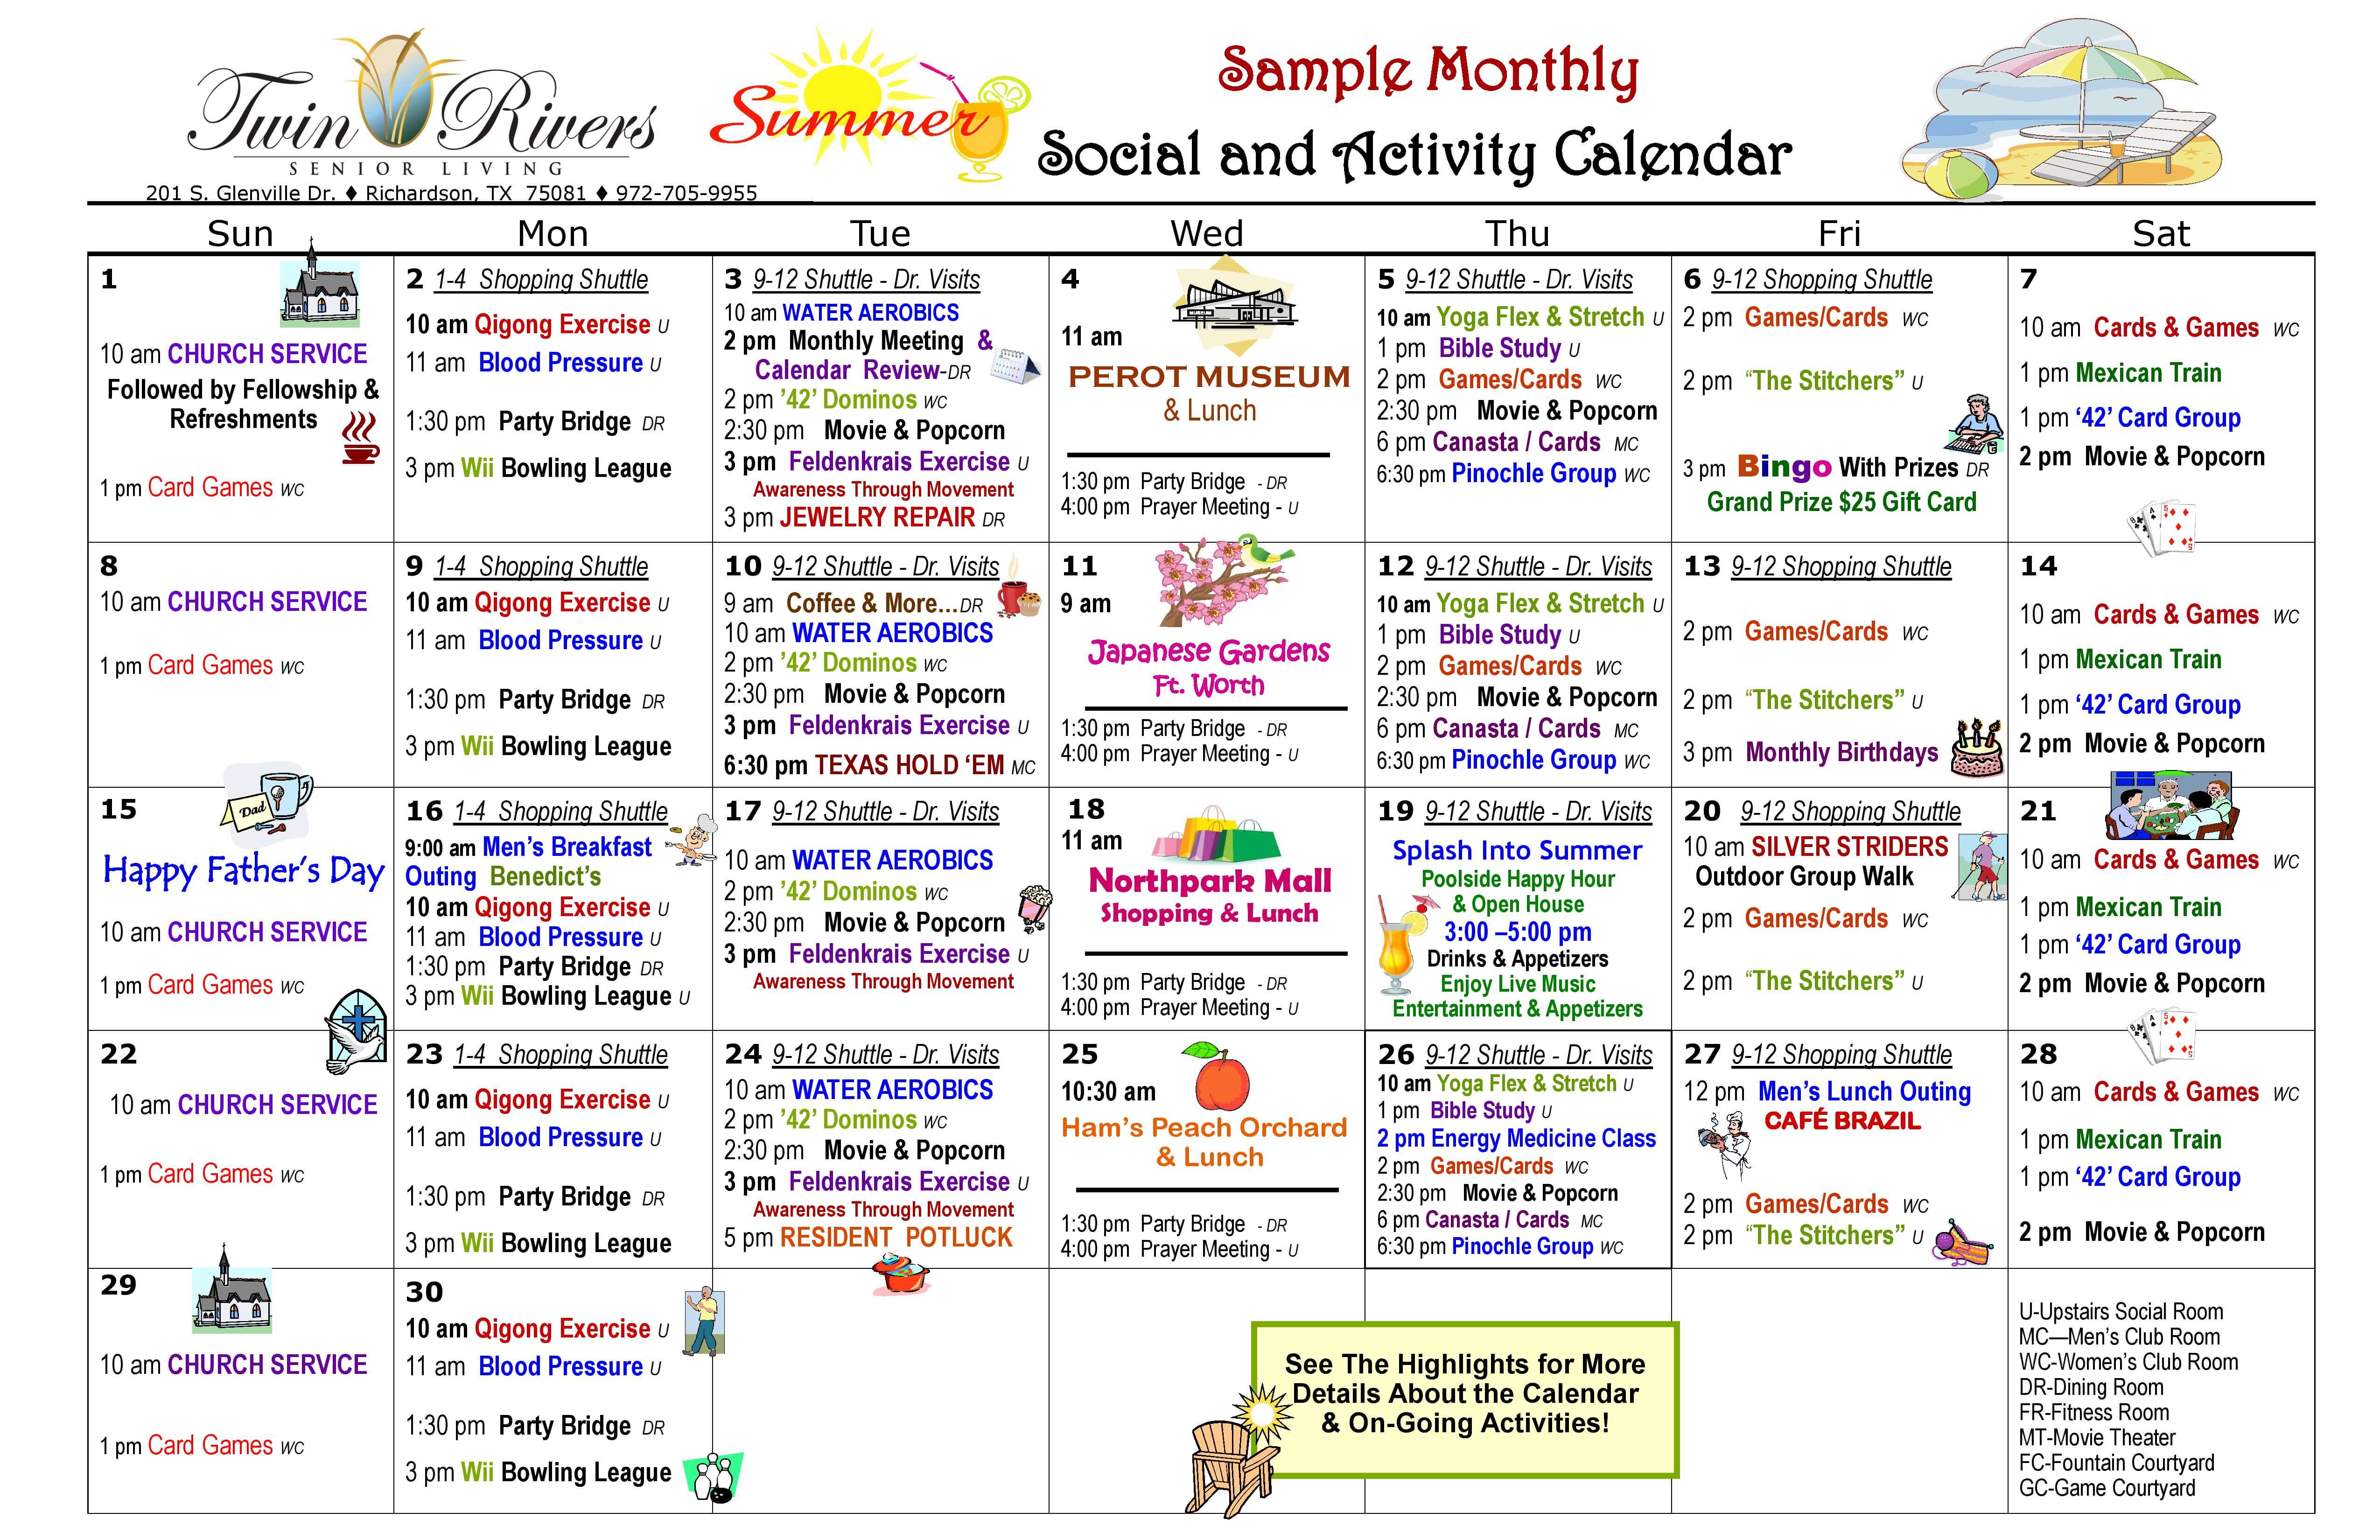 Calendar of Events and Activities Twin Rivers Senior Living